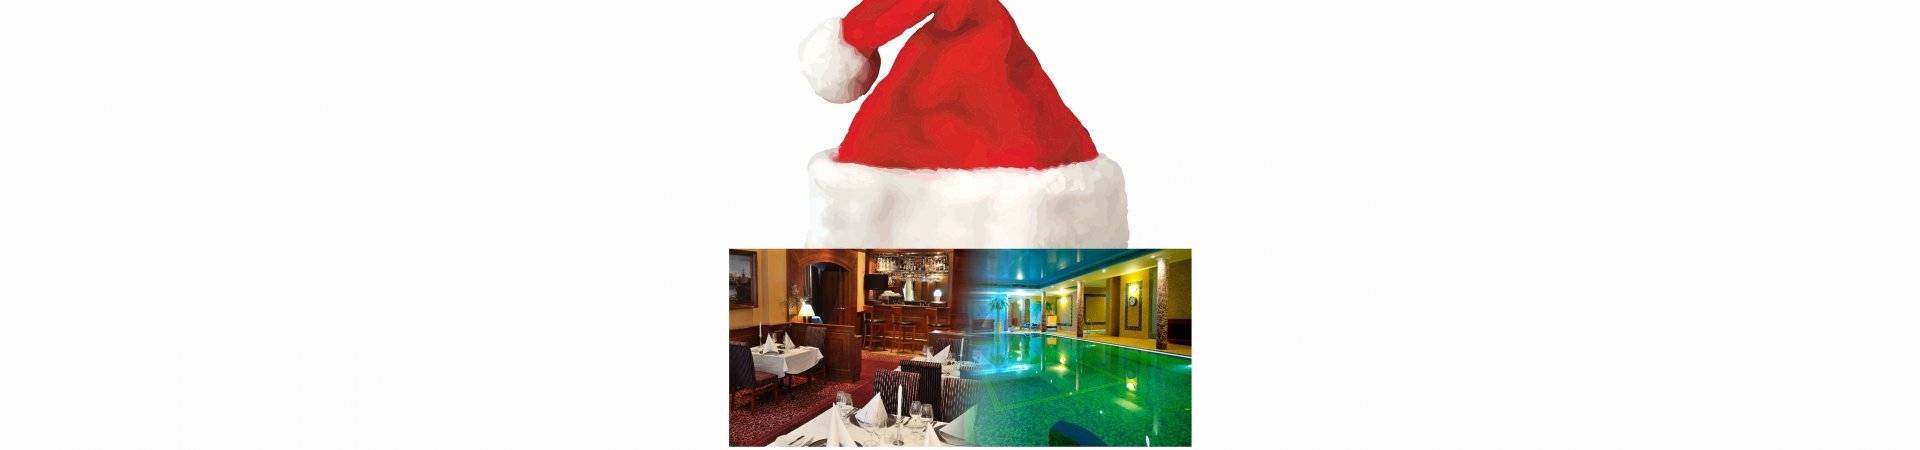 Christmas opening hours - restaurant and SPA